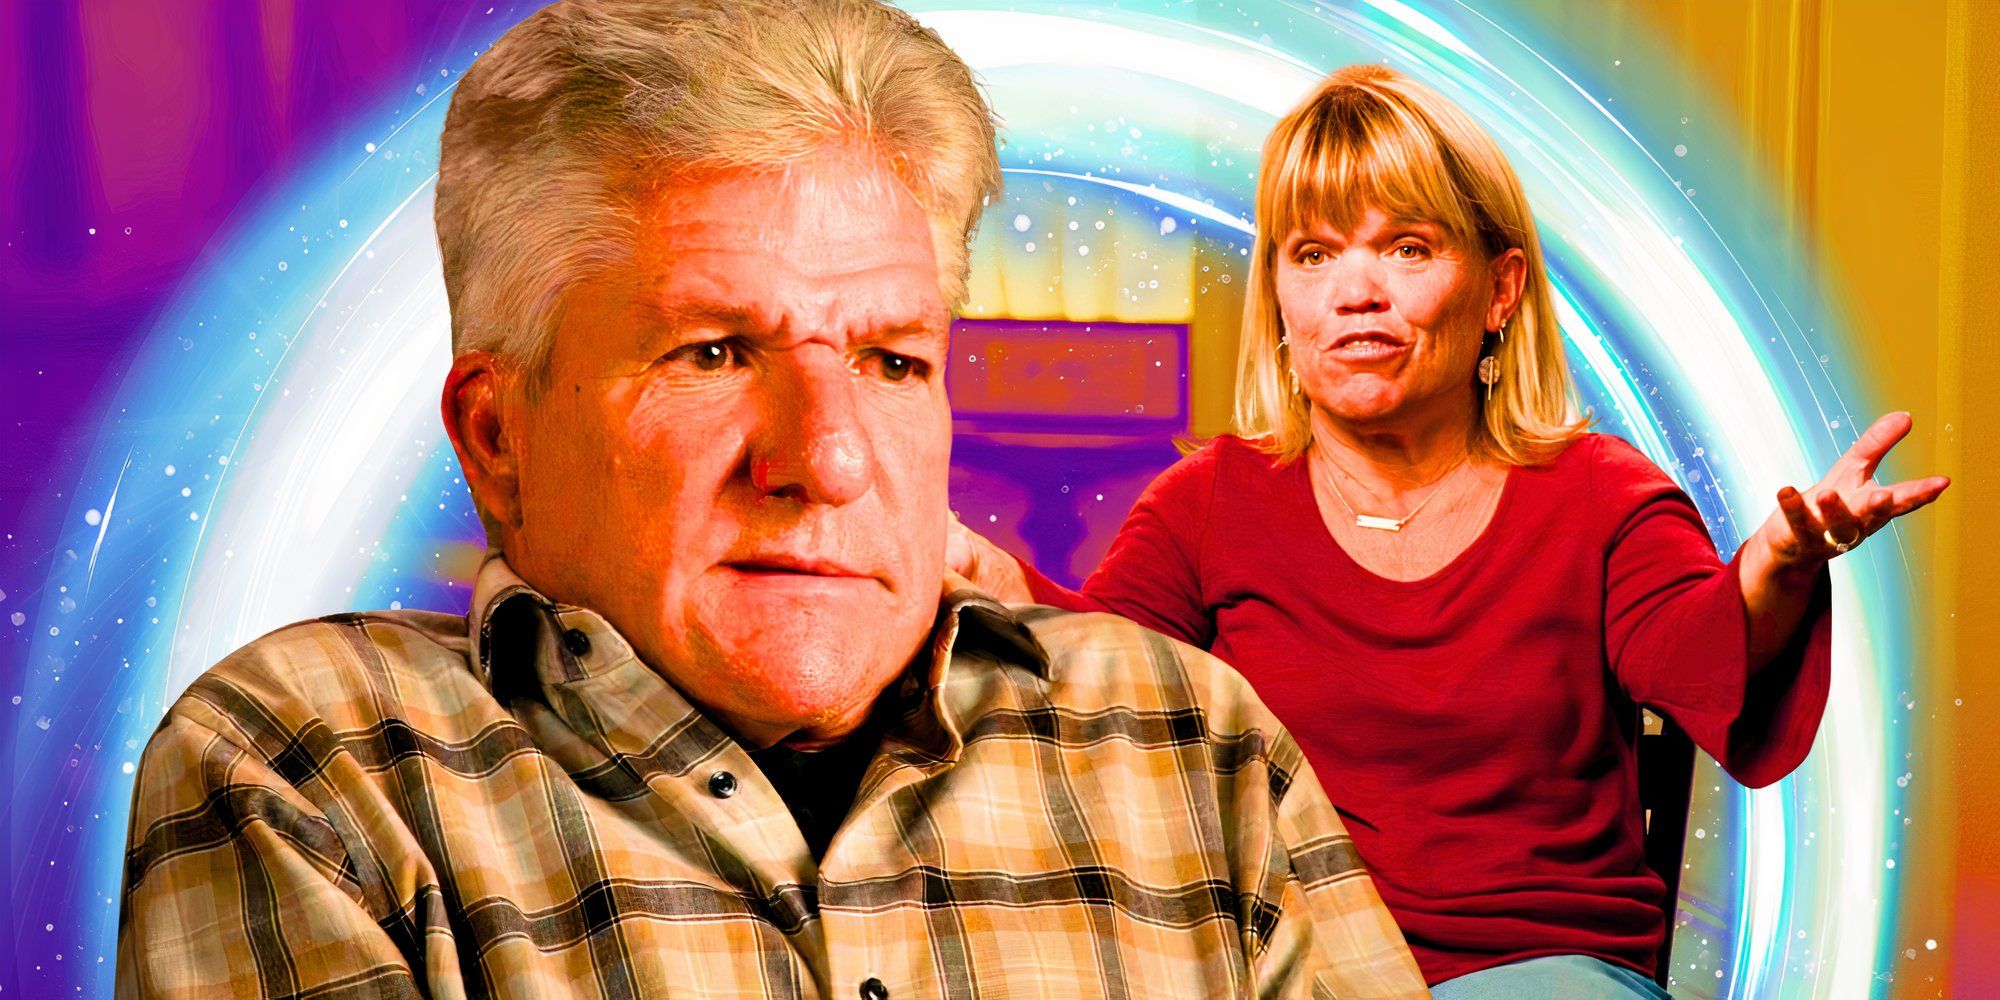 LPBW’s Matt Roloff has a stiffened body position, and Amy Roloff has her hands in the air in exasperation.